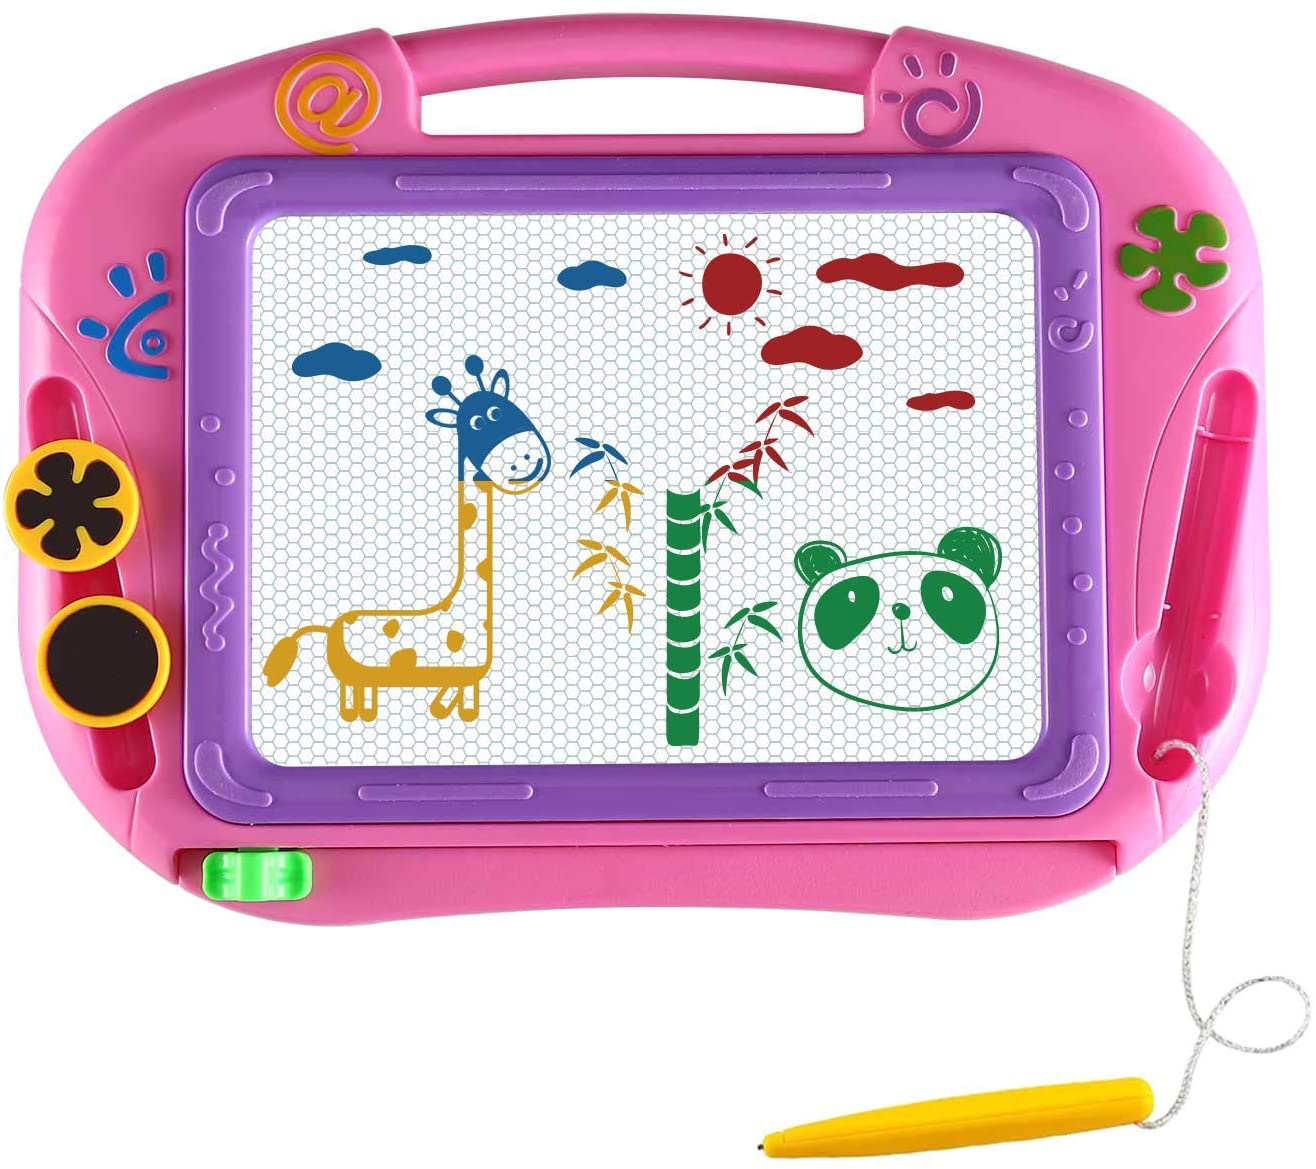 Xelparuc Magnetic Drawing Board Toy for Kids, Large Doodle Board Writing Painting Sketch Pad